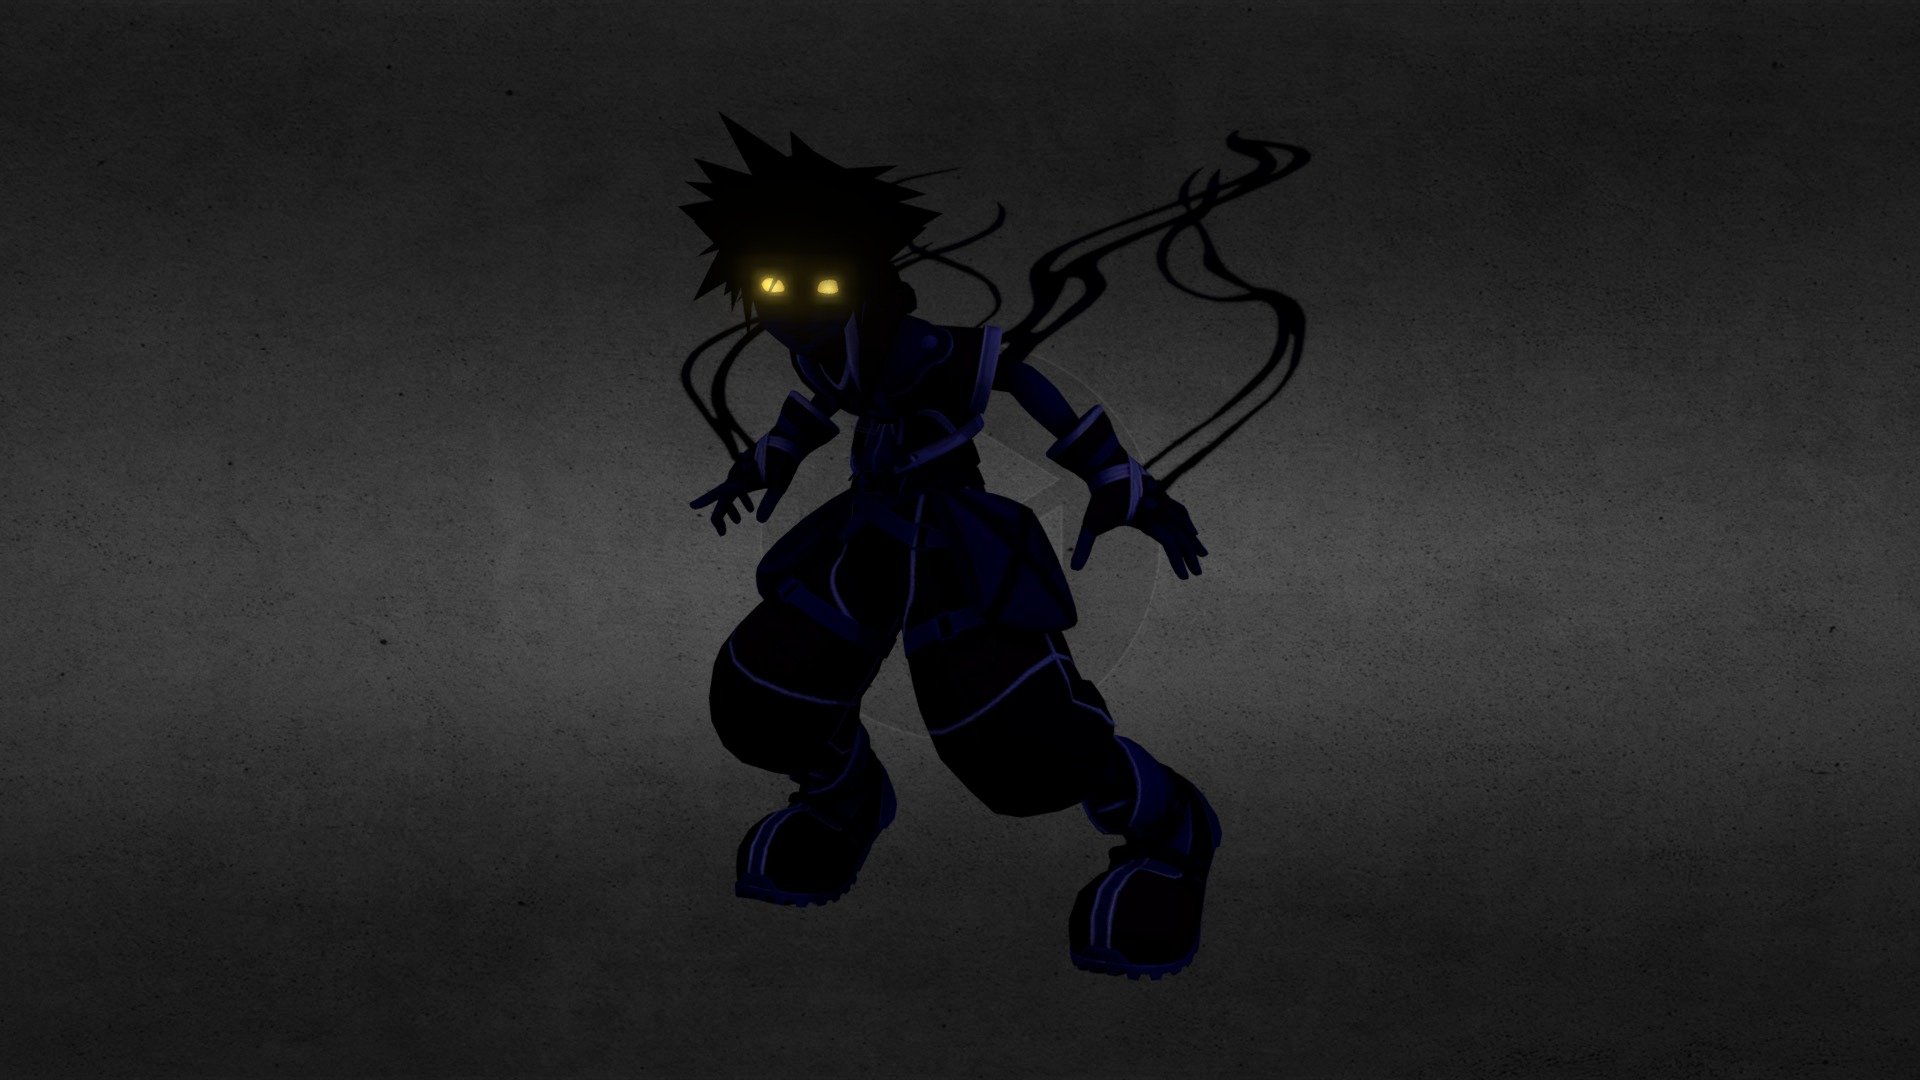 My recreation of Sora’s rage Form art from KH2/KH2FM using the SSBU model and kh2 hair

no you can’t DL this

I’d a appreciate if you gave this post a like, and that you follow me on sketchfab - Sora (Anti Form Art) SSBU Styled - 3D model by MG64 (@mariogamer64) 3d model